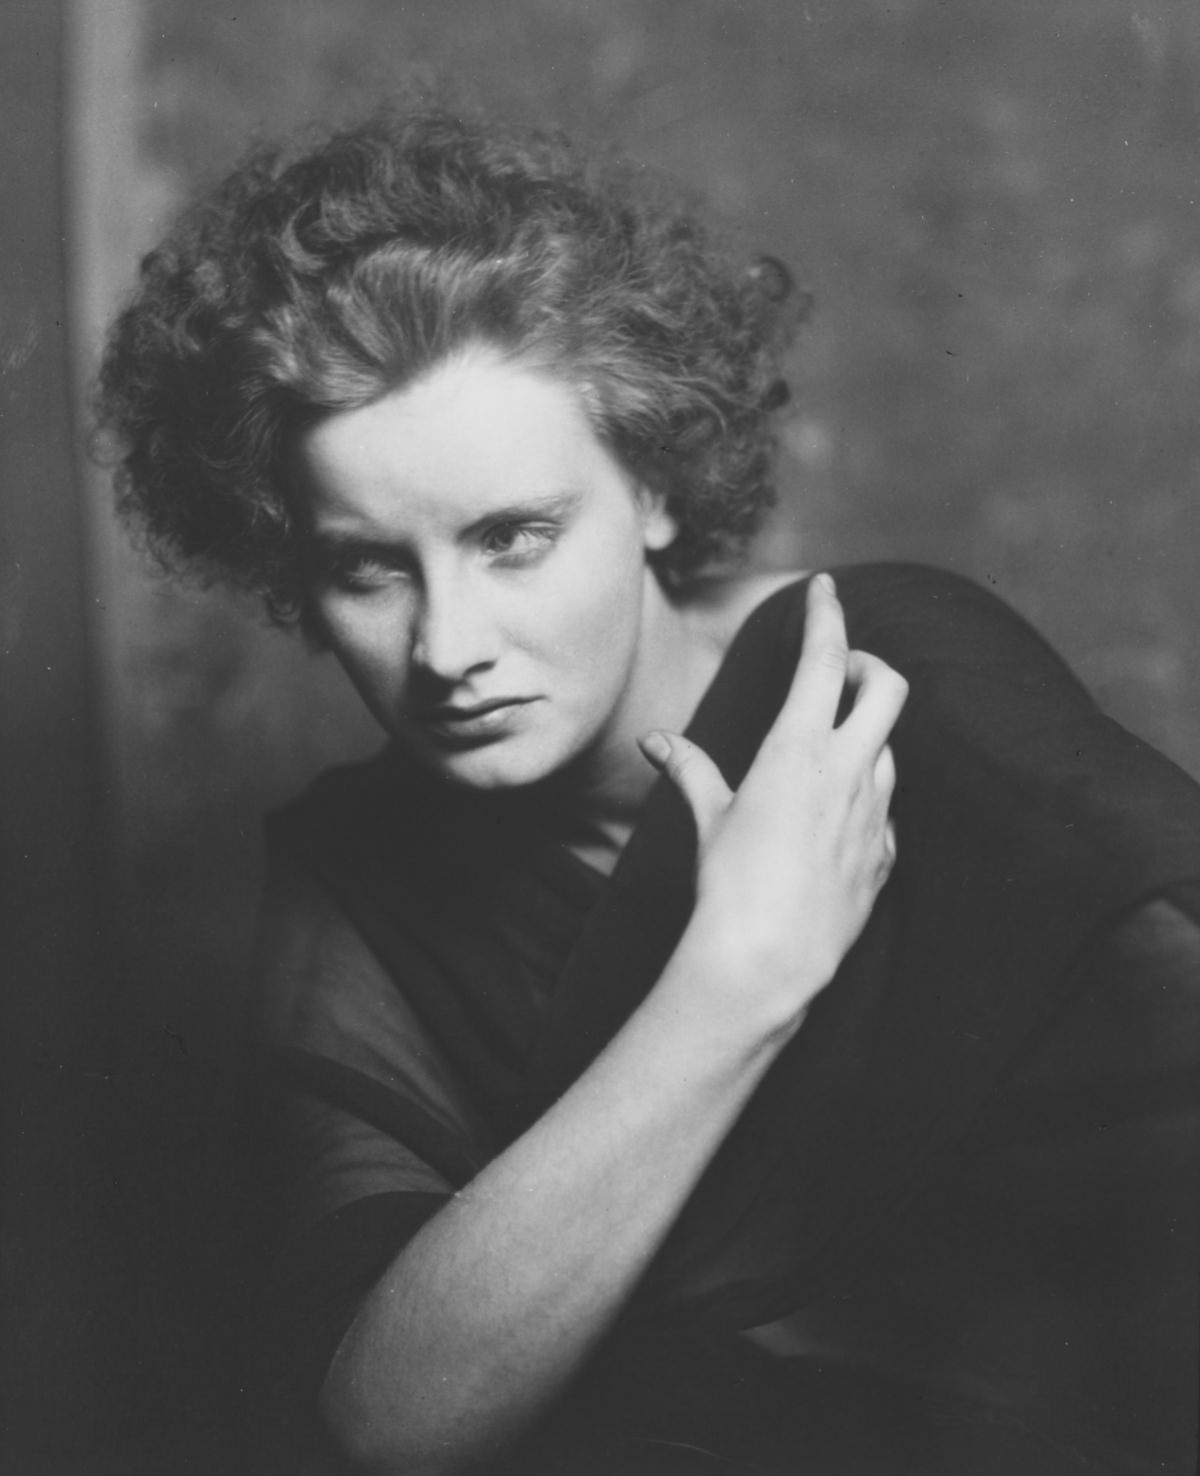 Arnold Genthe's Timeless Portraits of Greta Garbo, 1925: An Intimate Look at a Legend